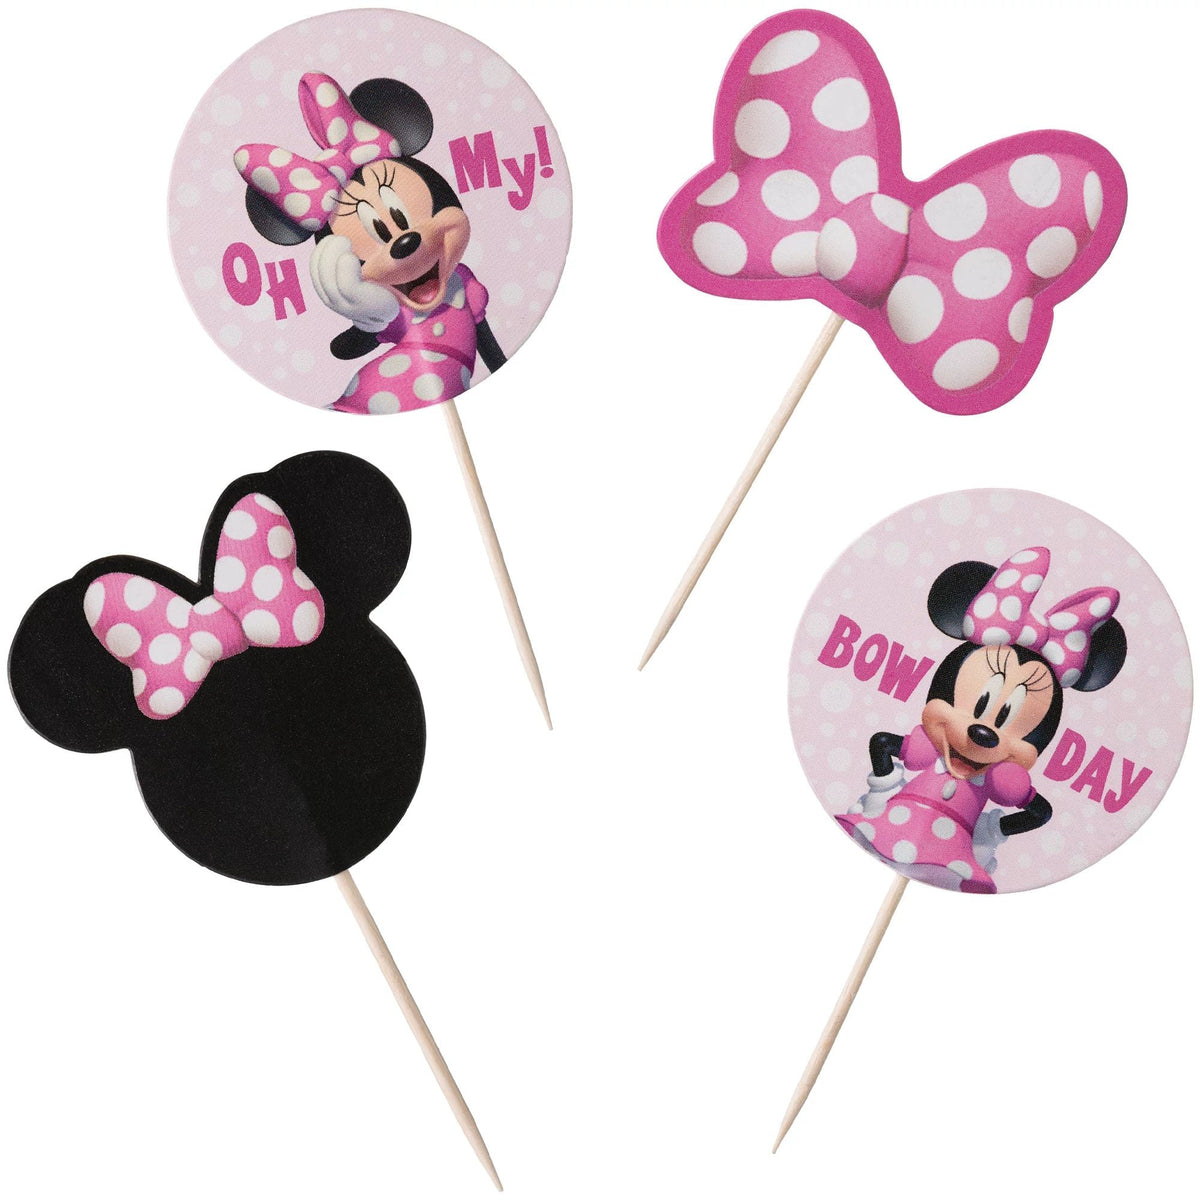 AMSCAN CA Cake Supplies Minnie Mouse Forever Birthday Cupcake Picks, 24 Count 192937424490